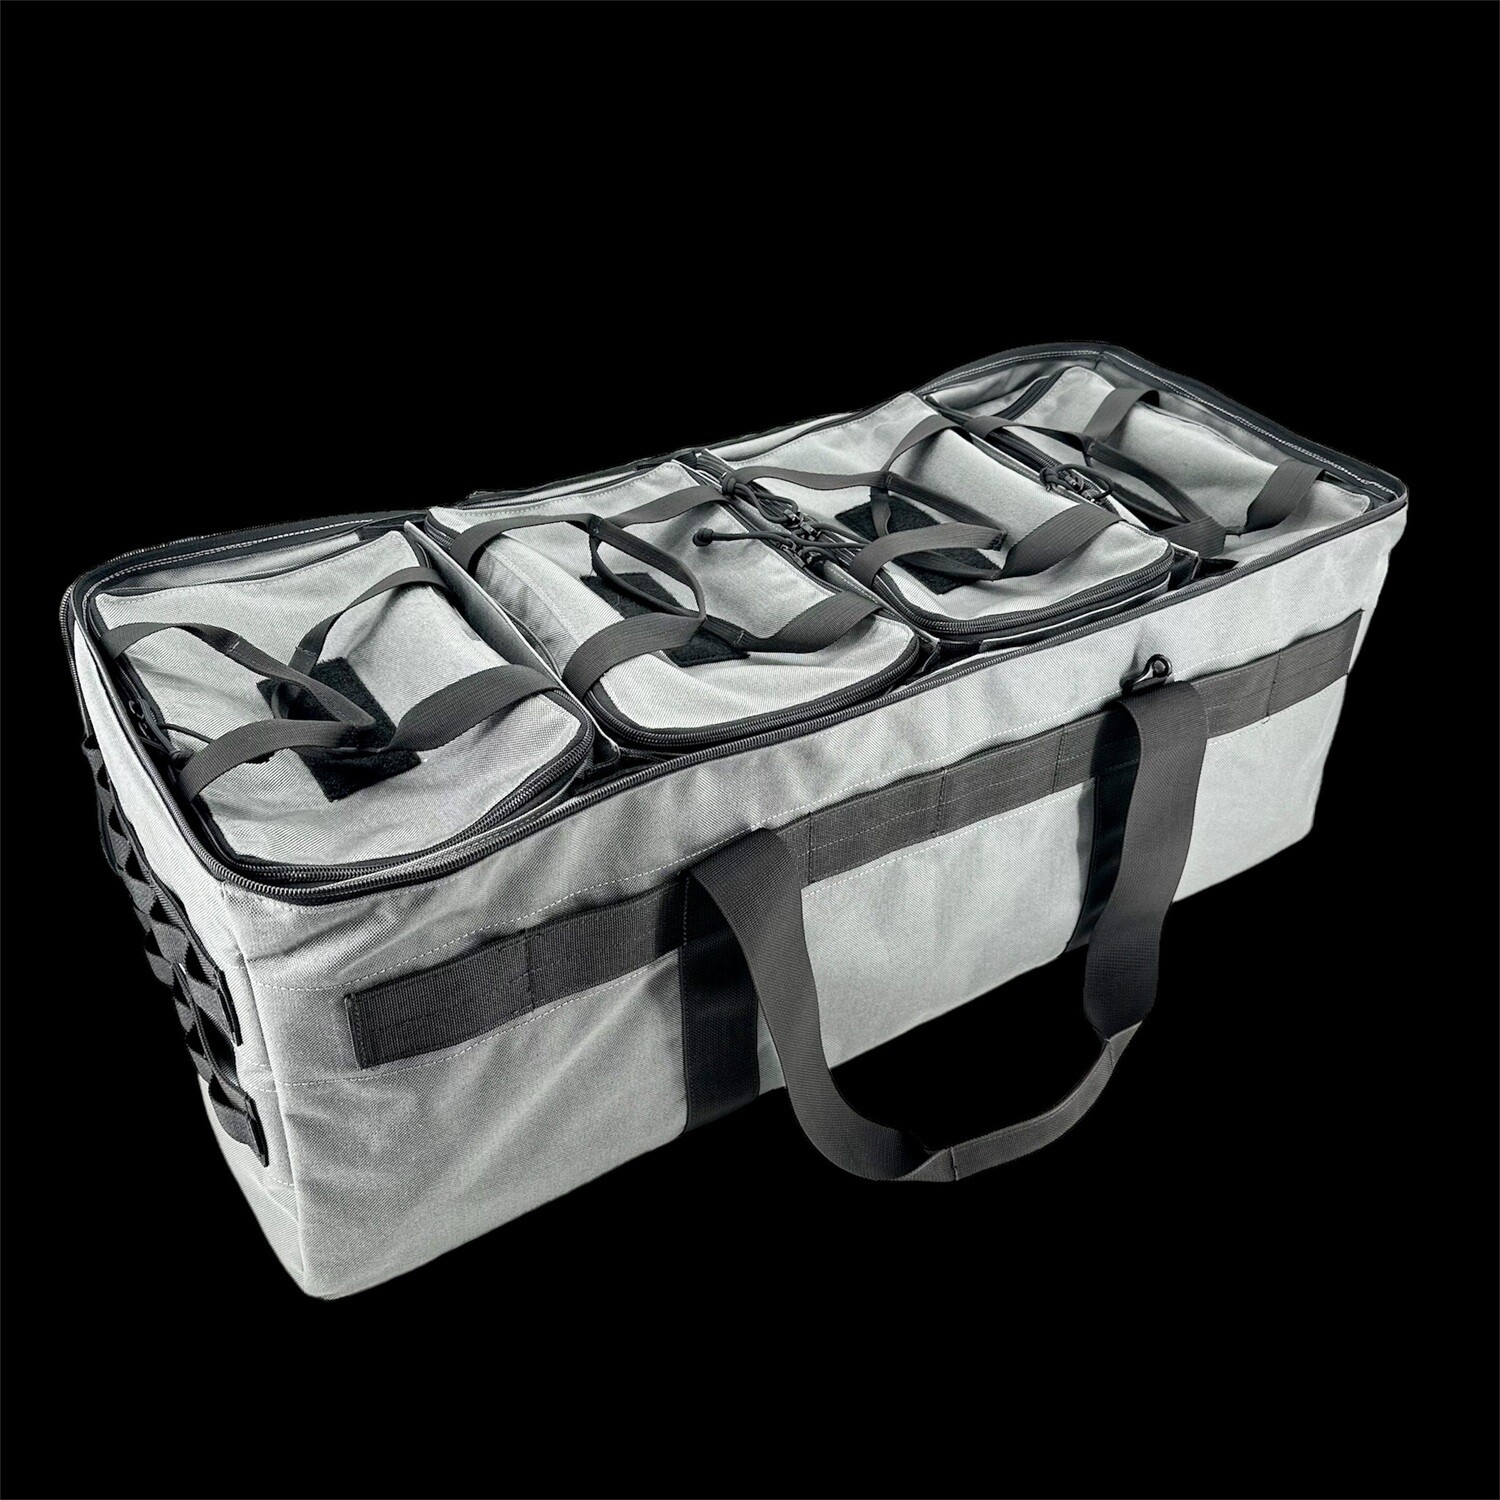 AIMS™ Multi-Channel Duffel Bag - Gray - 4 Slot - Limited Edition